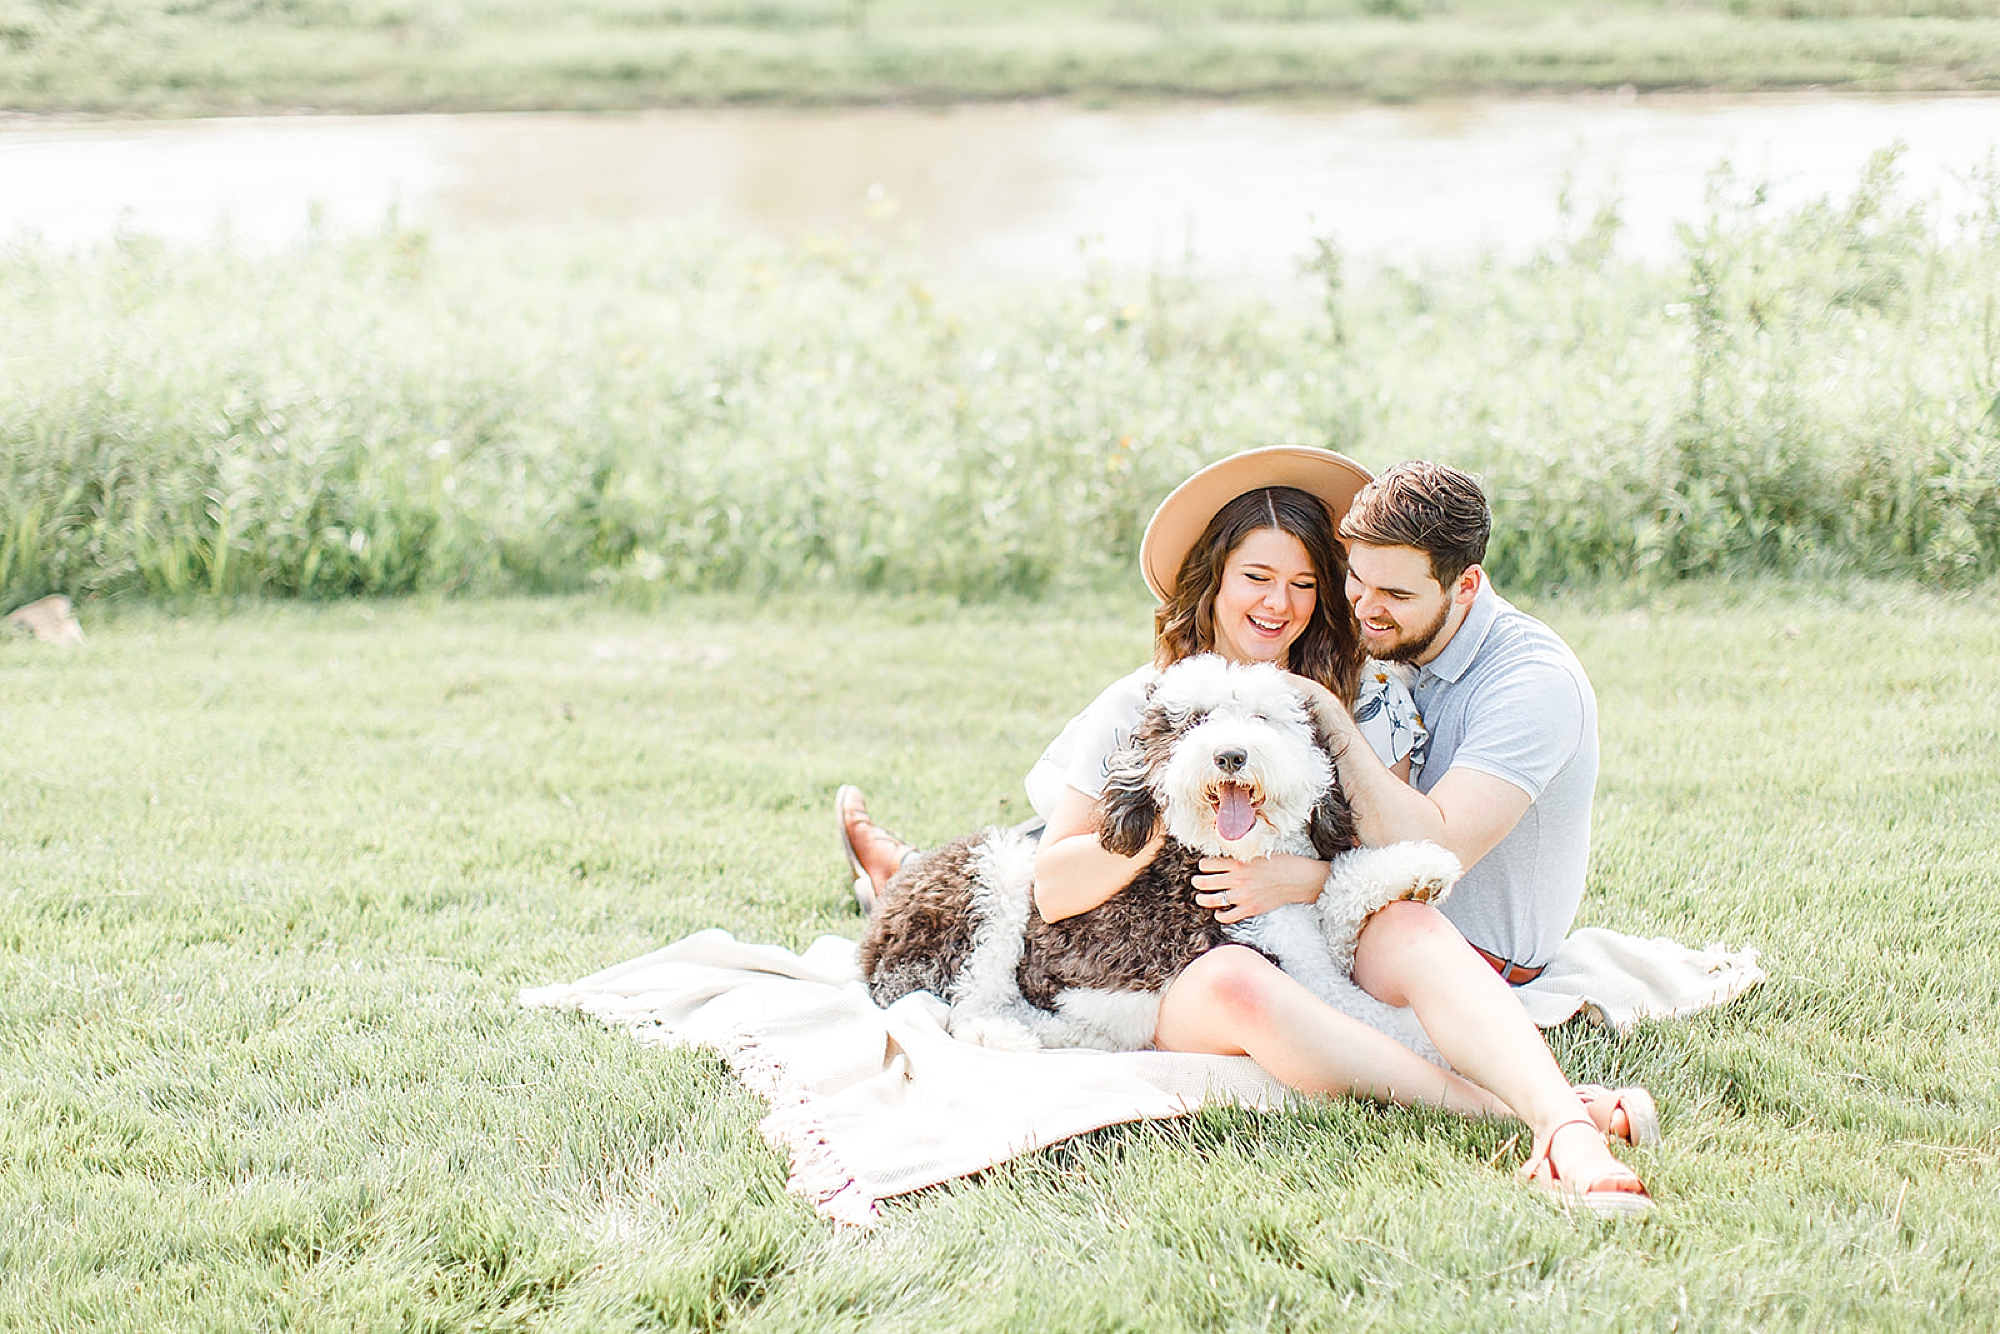 Ohio family poses on blanket with dog for third anniversary photos